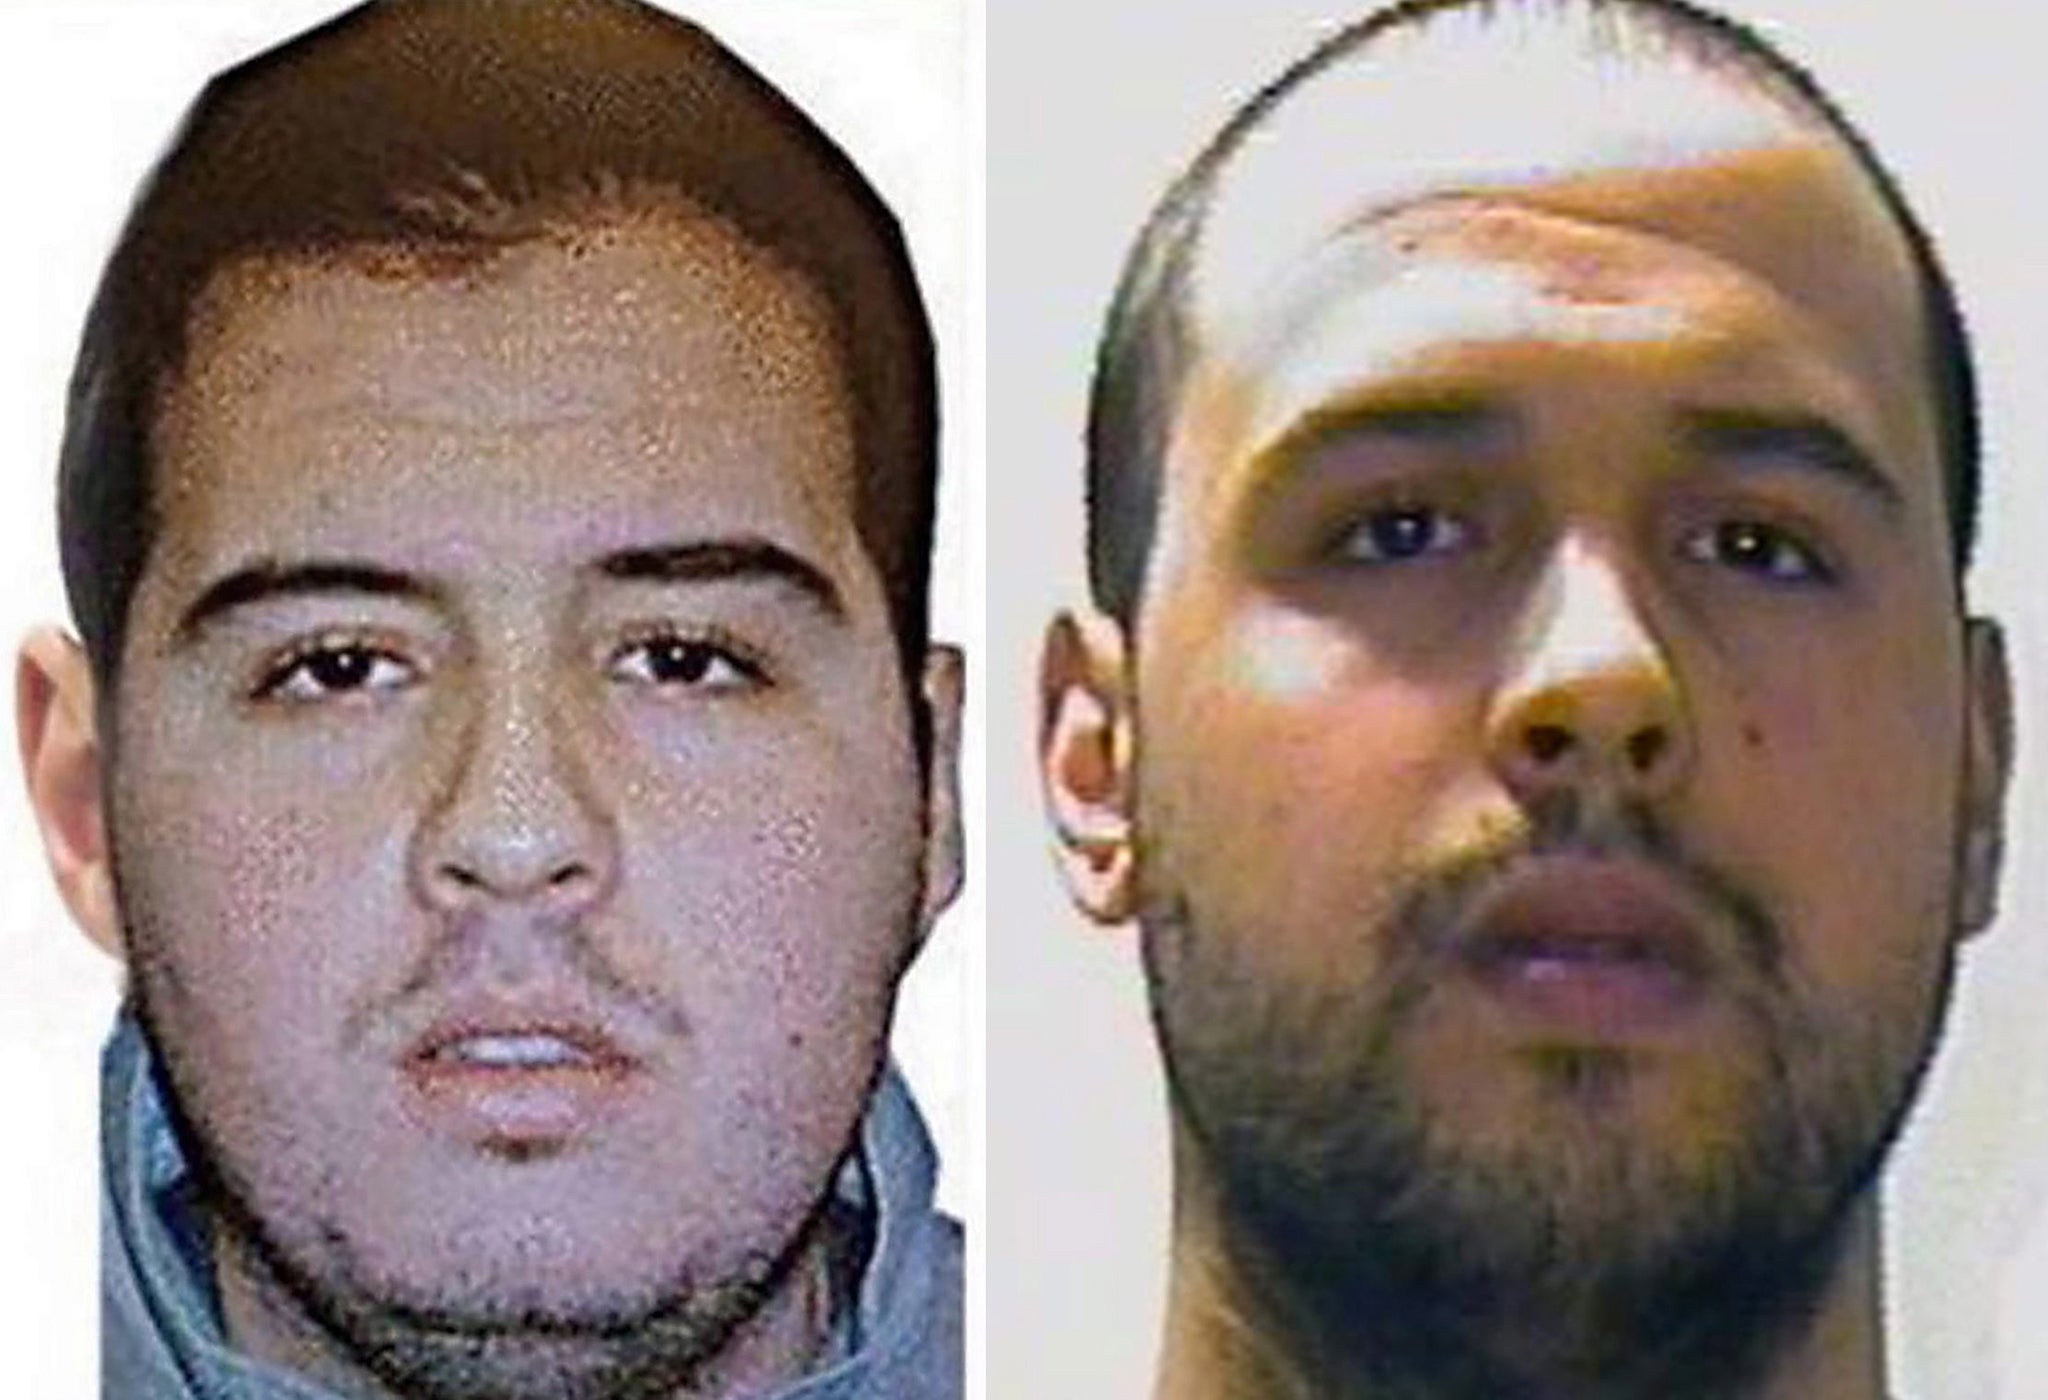 Brothers Khalid and Brahim el-Bakraoui carried out out suicide bomb attacks at Brussels Airport and on the Metro